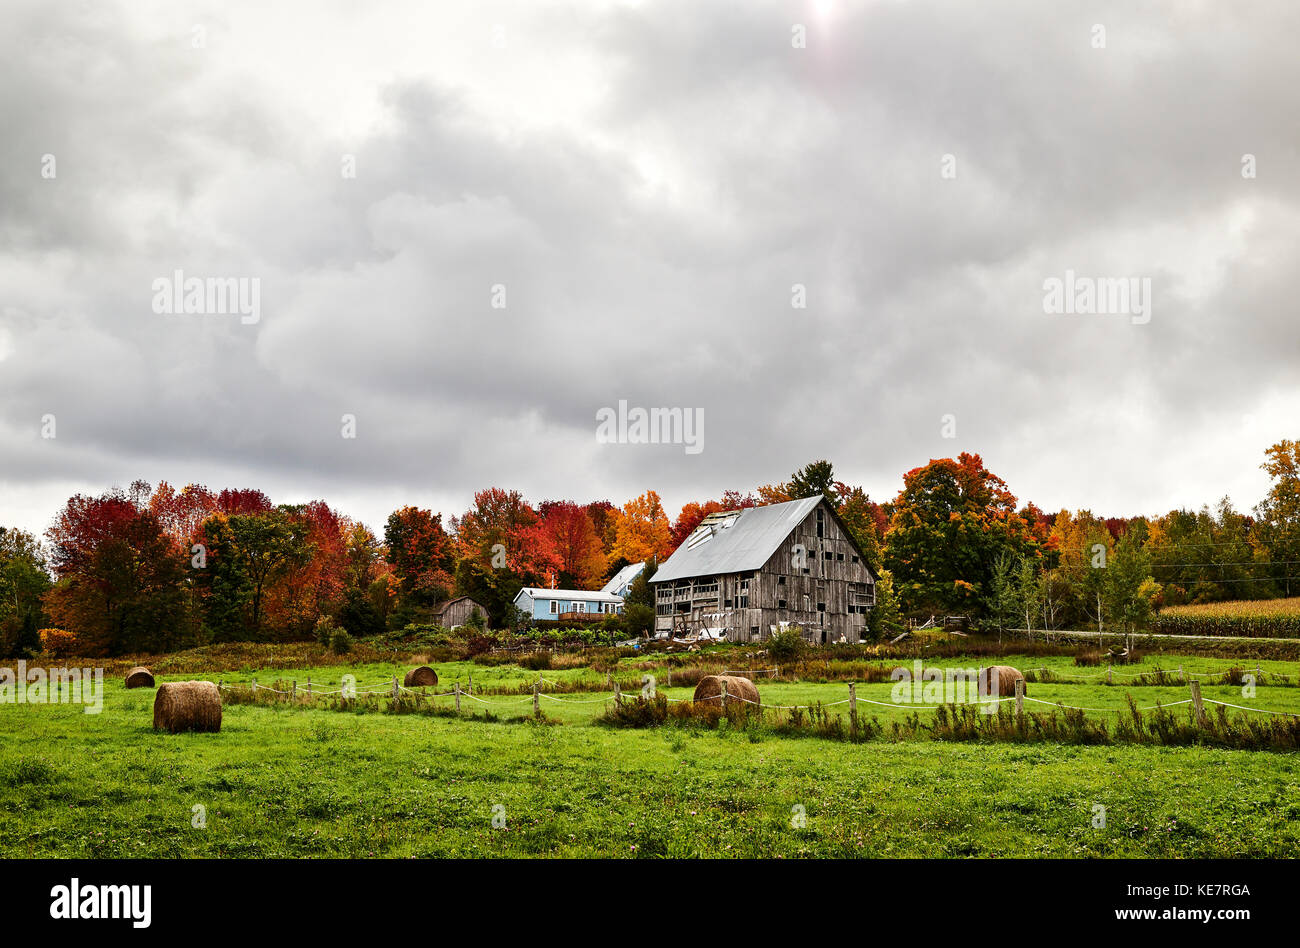 Barn And Hay Bales In A Field With An Autumn Coloured Forest; Dunham, Quebec, Canada Stock Photo